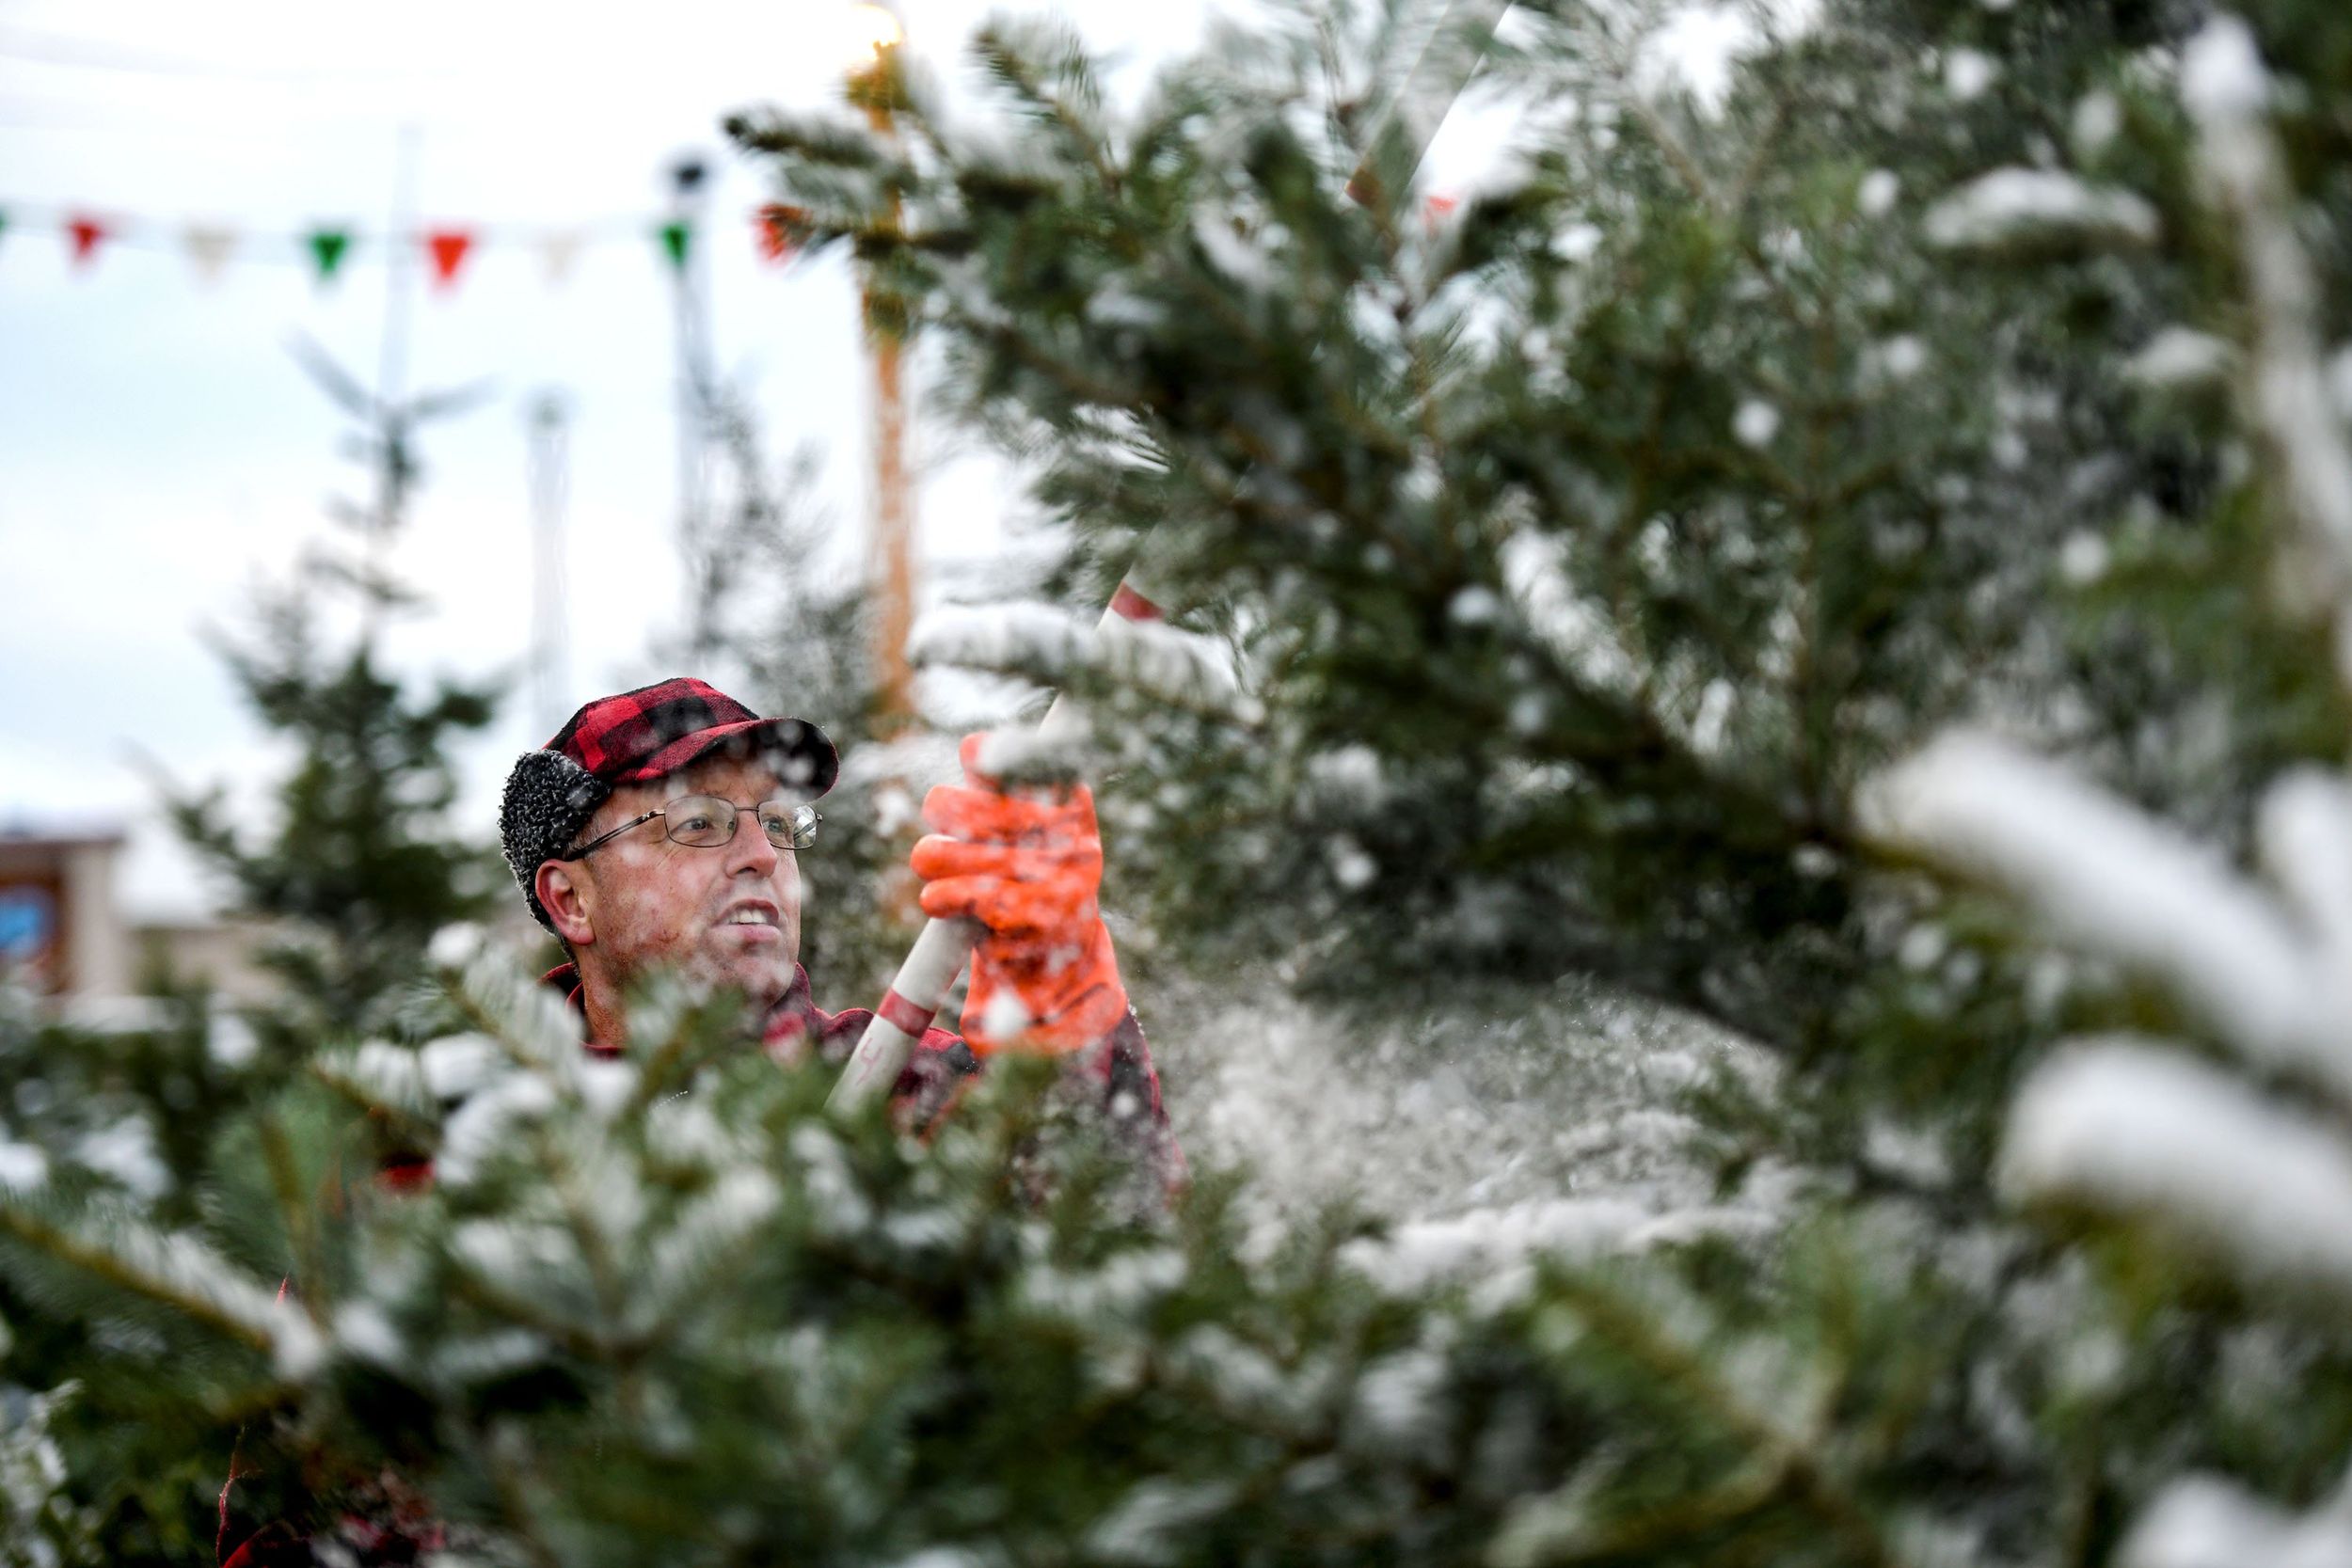 City of Spokane will pick up your Christmas tree for free on your